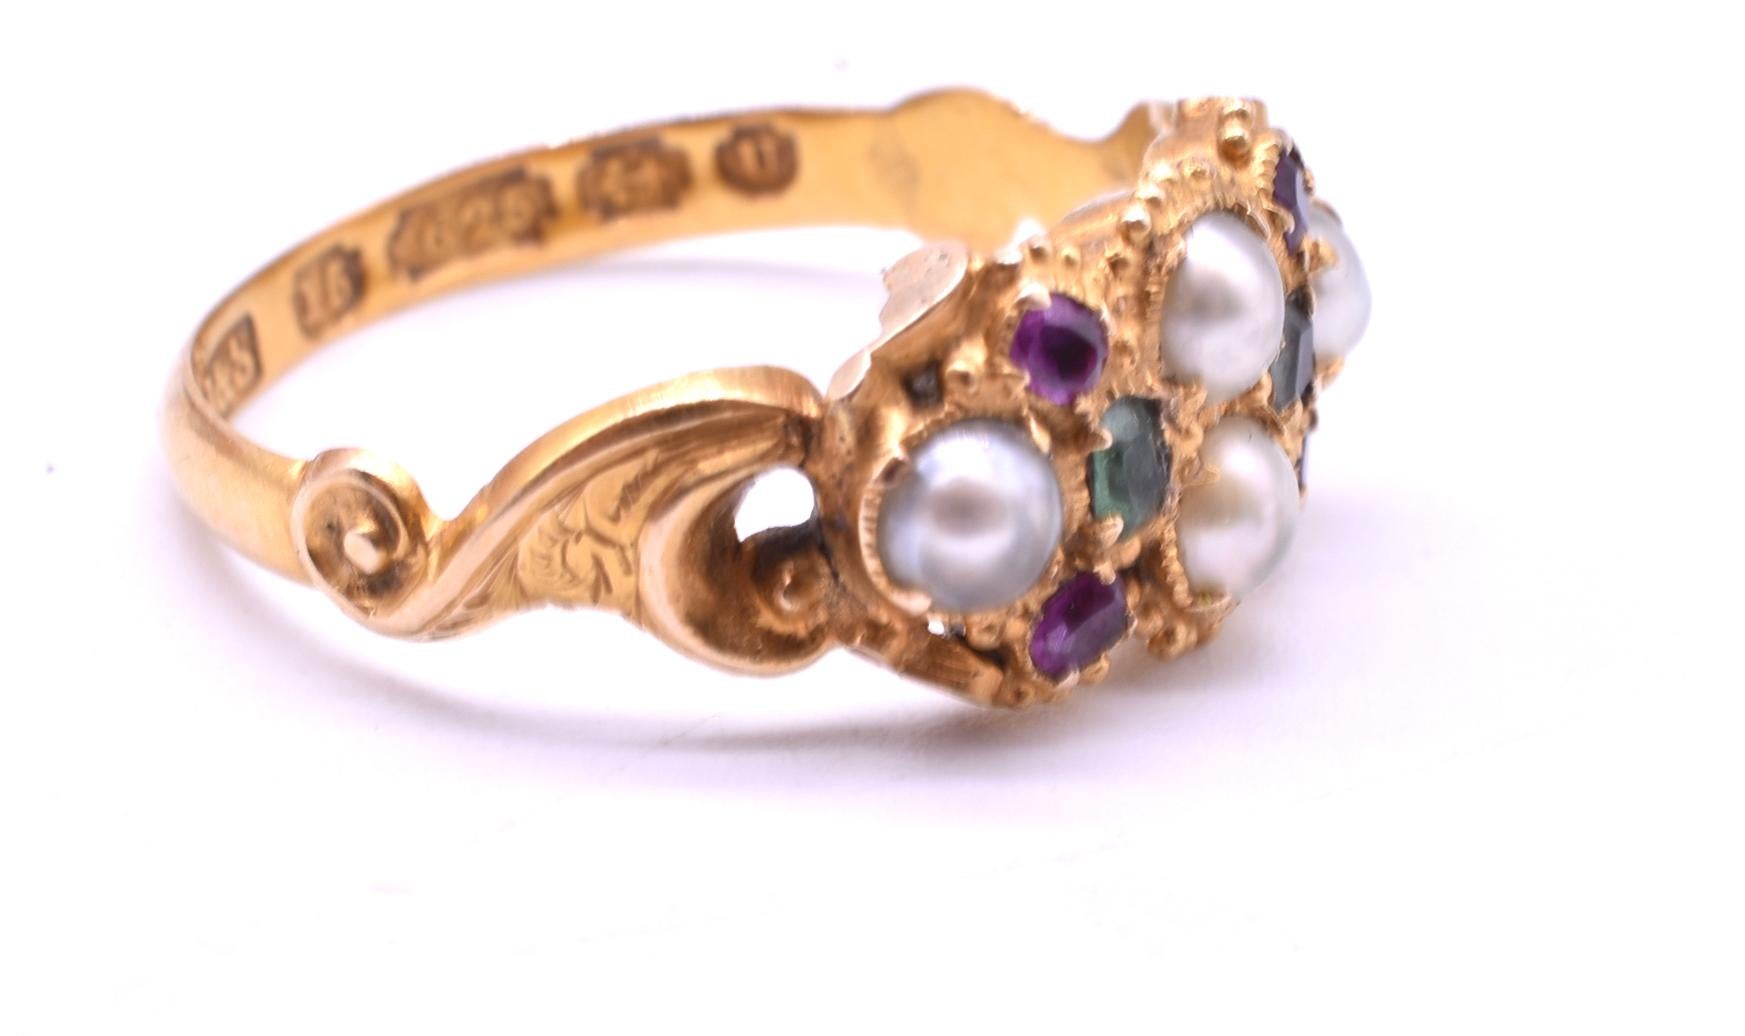 Lovely multi-stone 15K ring with 4 natural pearls as the central stones and 4 rubies and 2 emeralds accenting the pearls. This ring could have been worn as part of the Suffragist movement, as the white, violet, and green stones convey the message